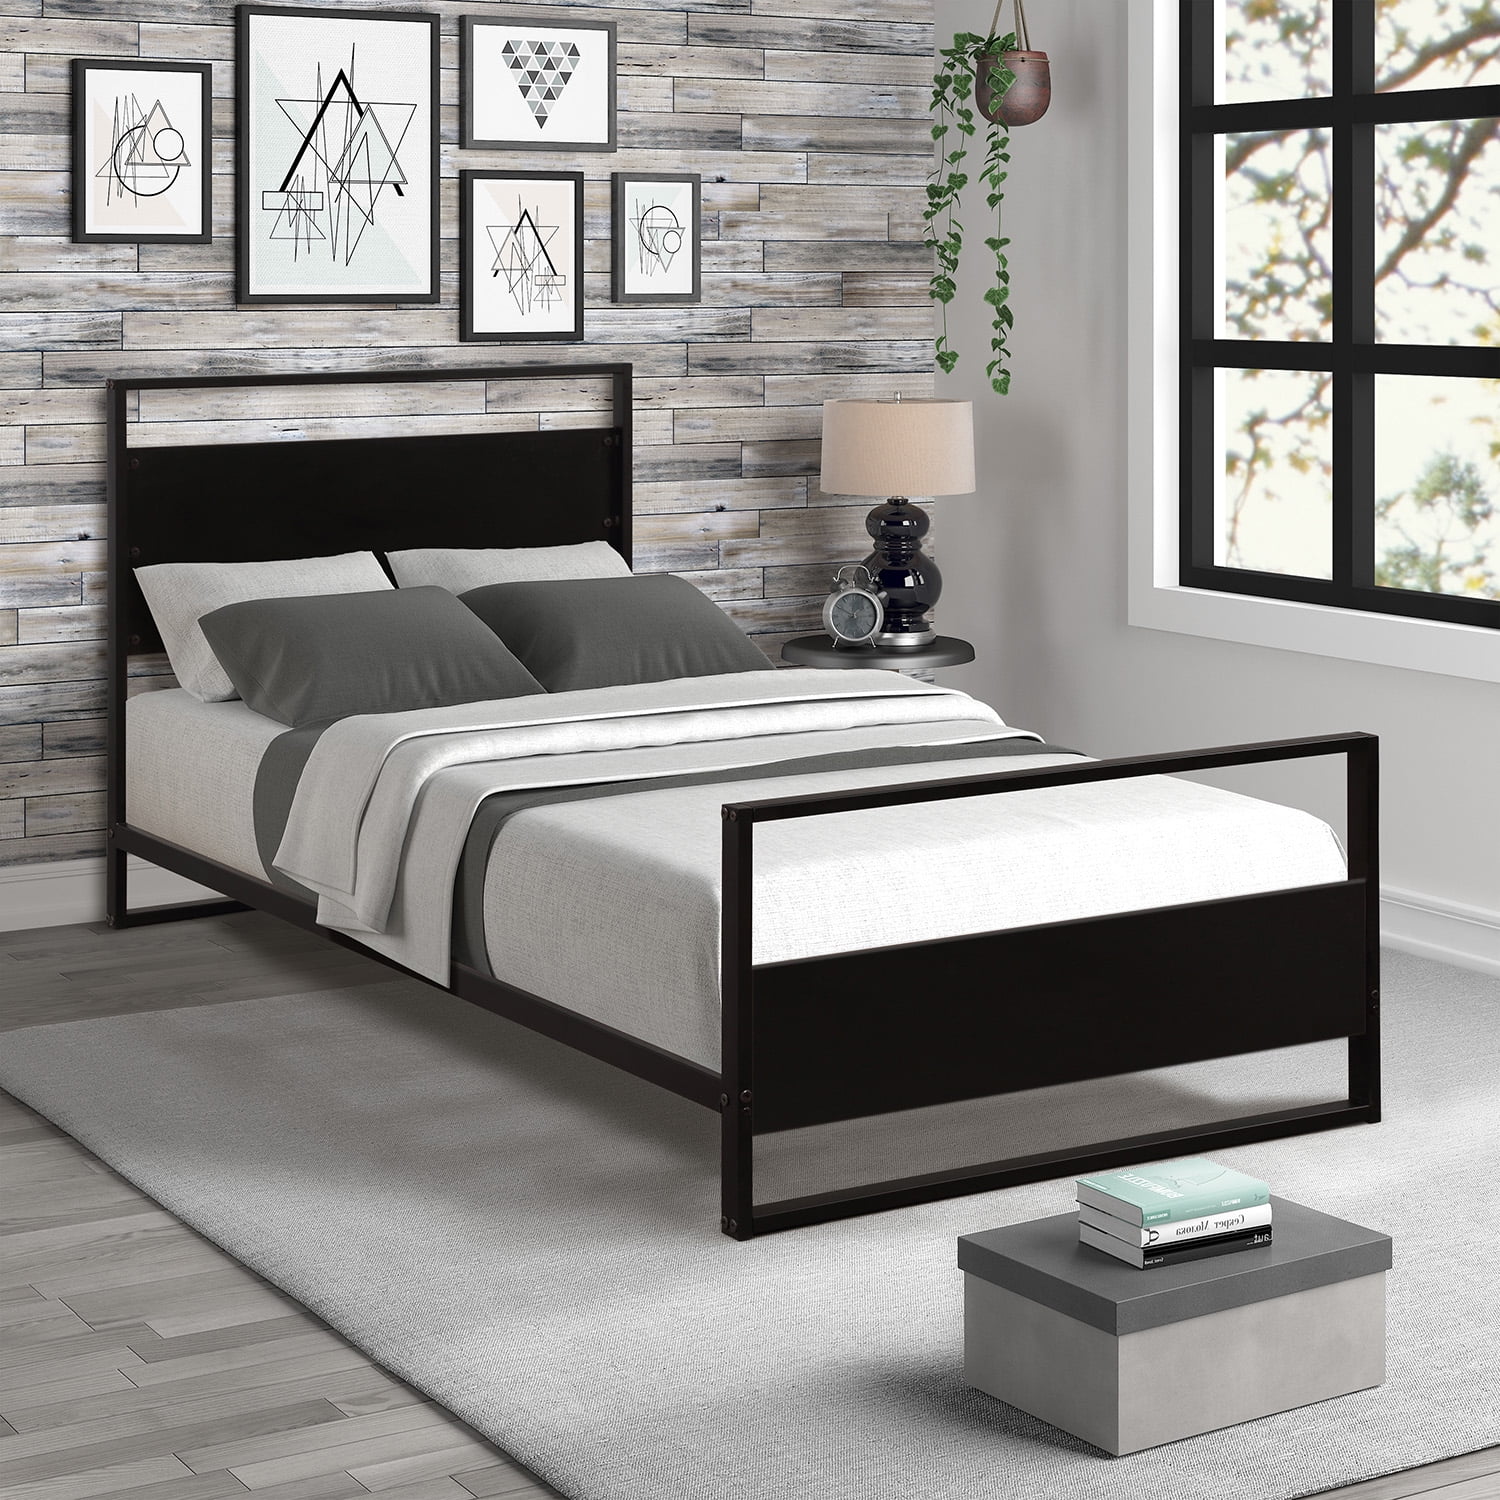 Details about   Queen Full Size Platform Bed Frame Twin Headboard Wood Iron Metal Modern Bedroom 